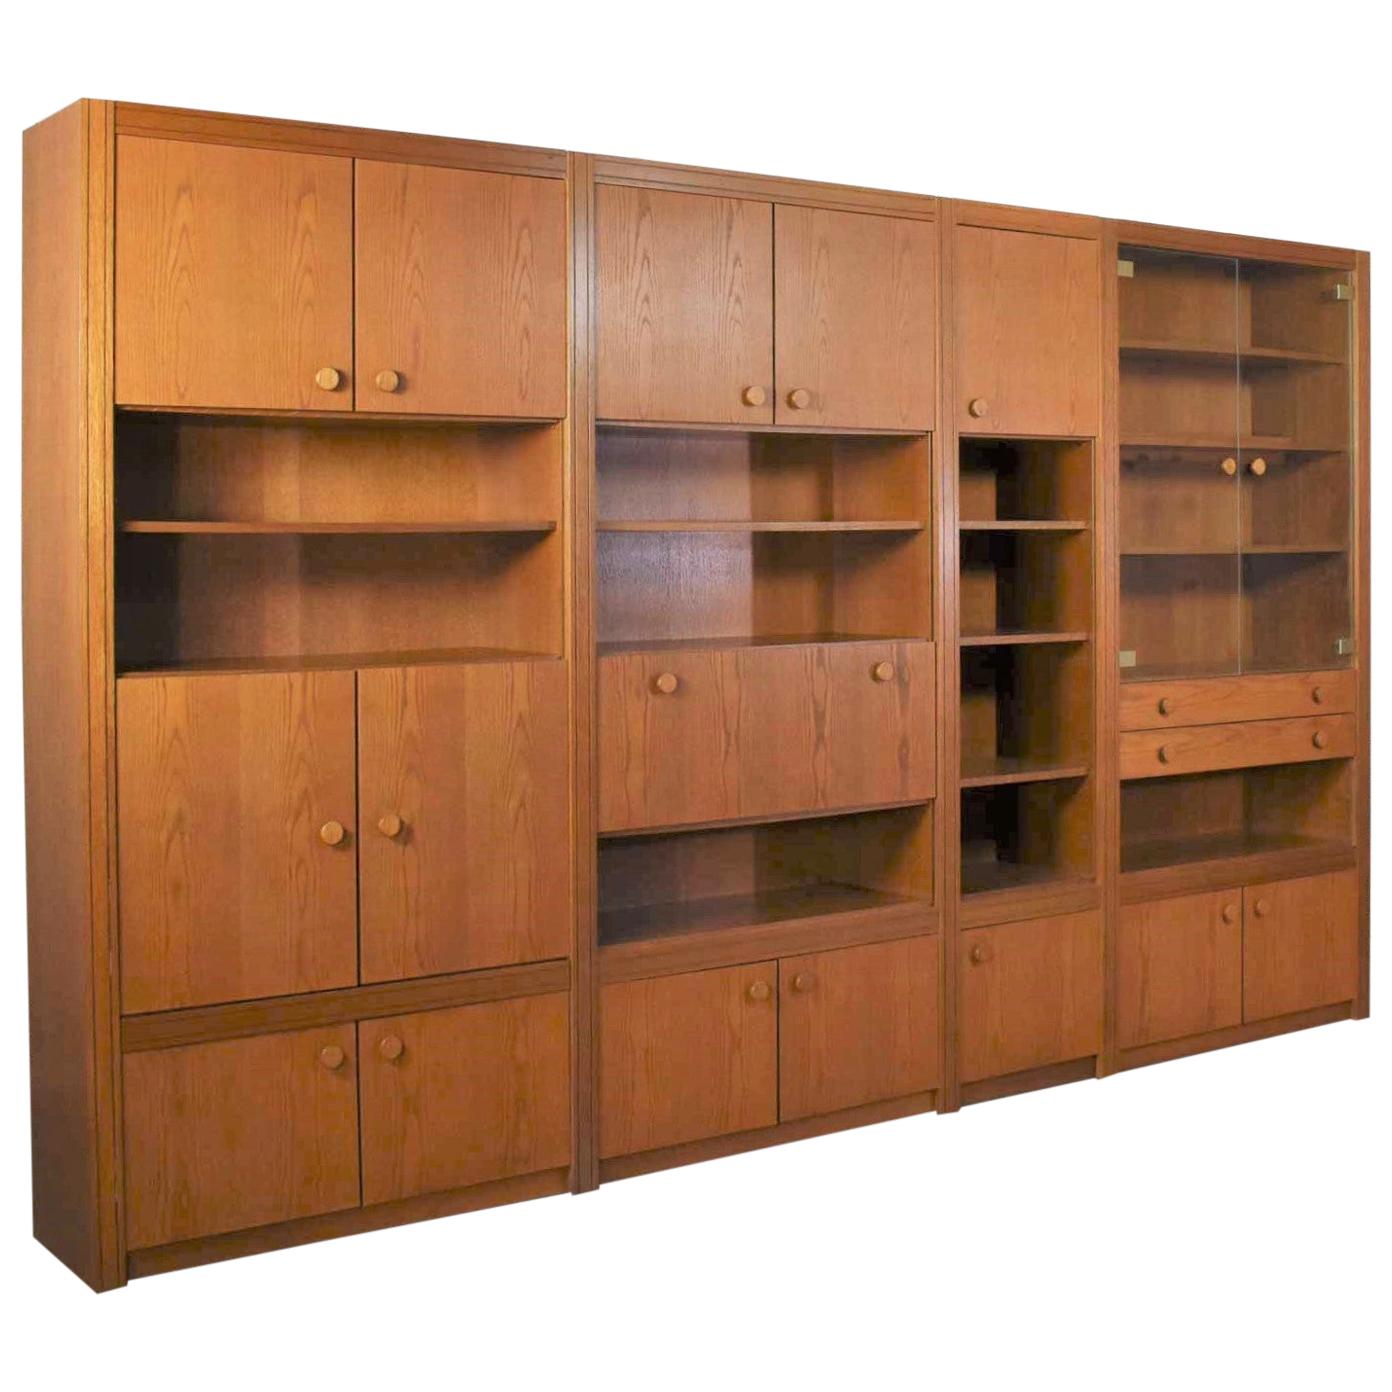 Vintage Modern Oak 4 Section Modular Wall Unit from Lord Series by Kämper Intl.